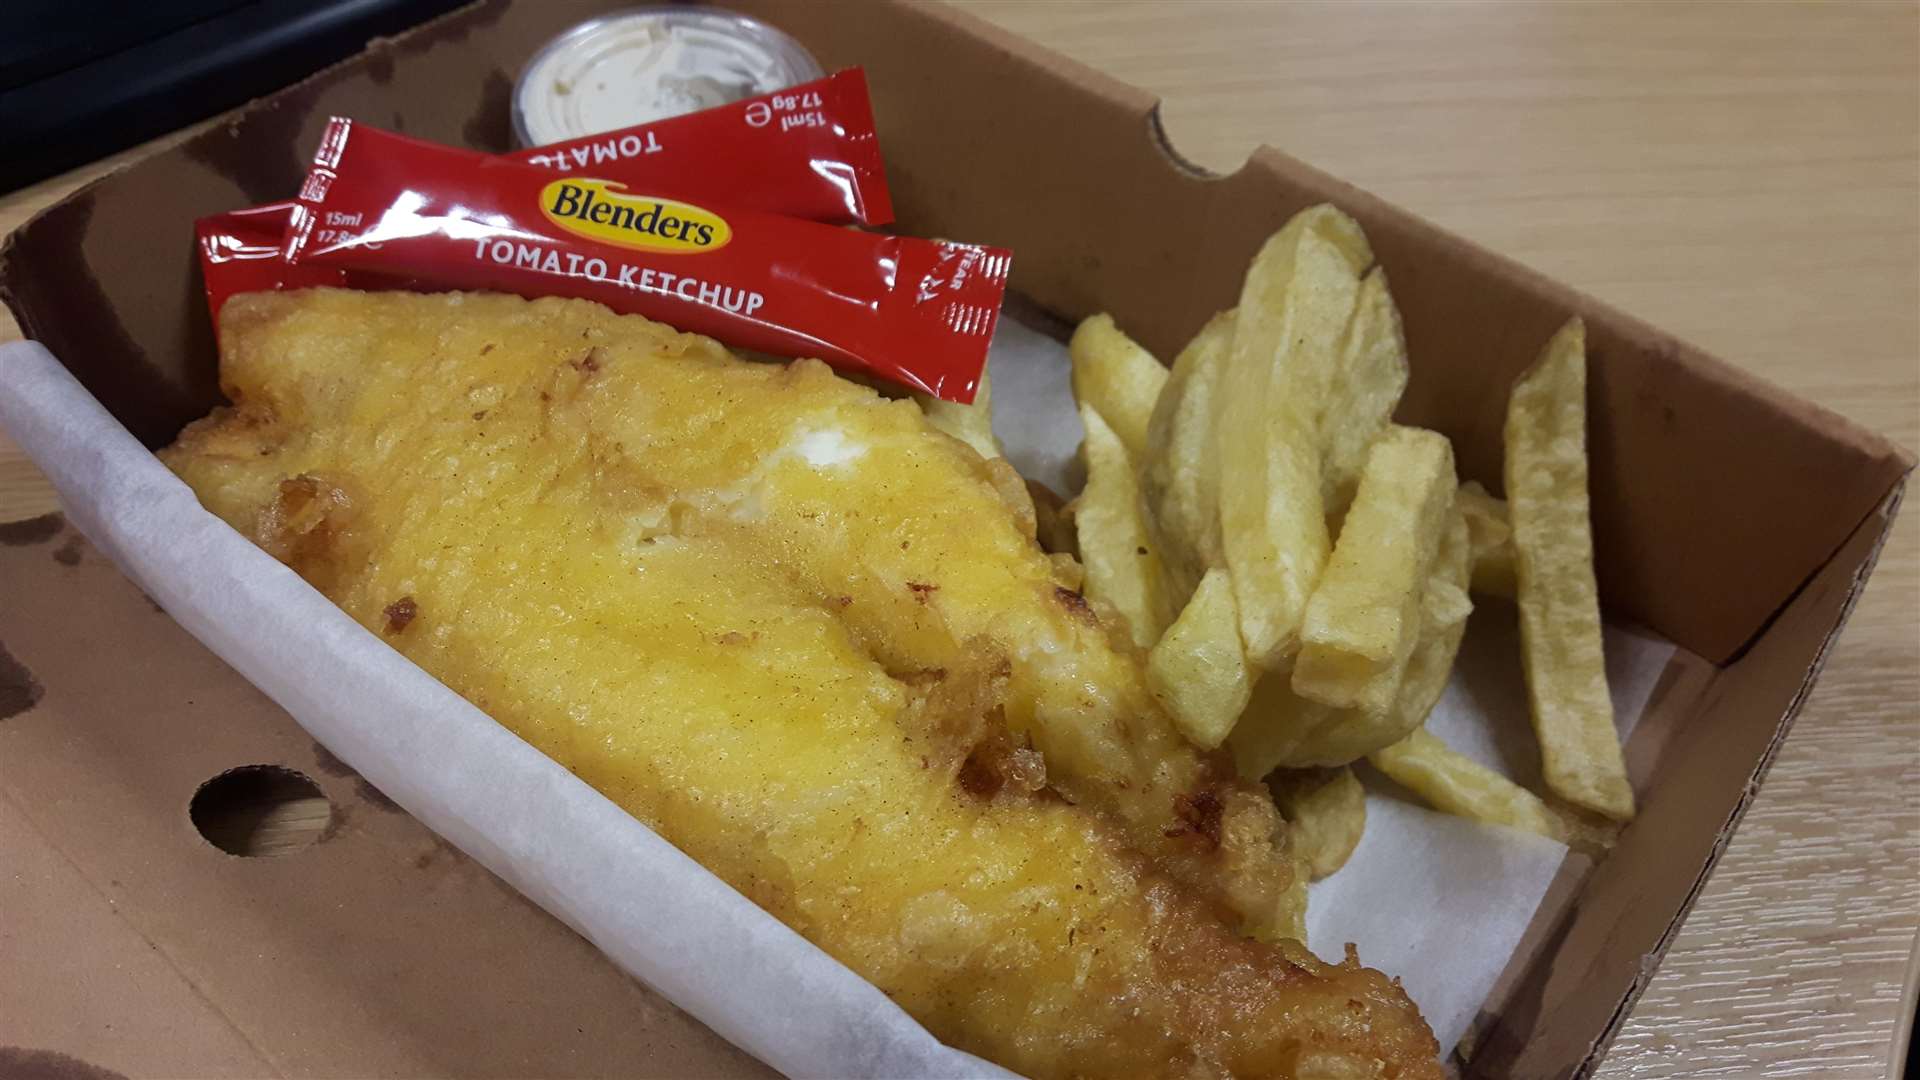 Cod and chips from Lewis’s Fish & Grill in Maidstone (27455125)